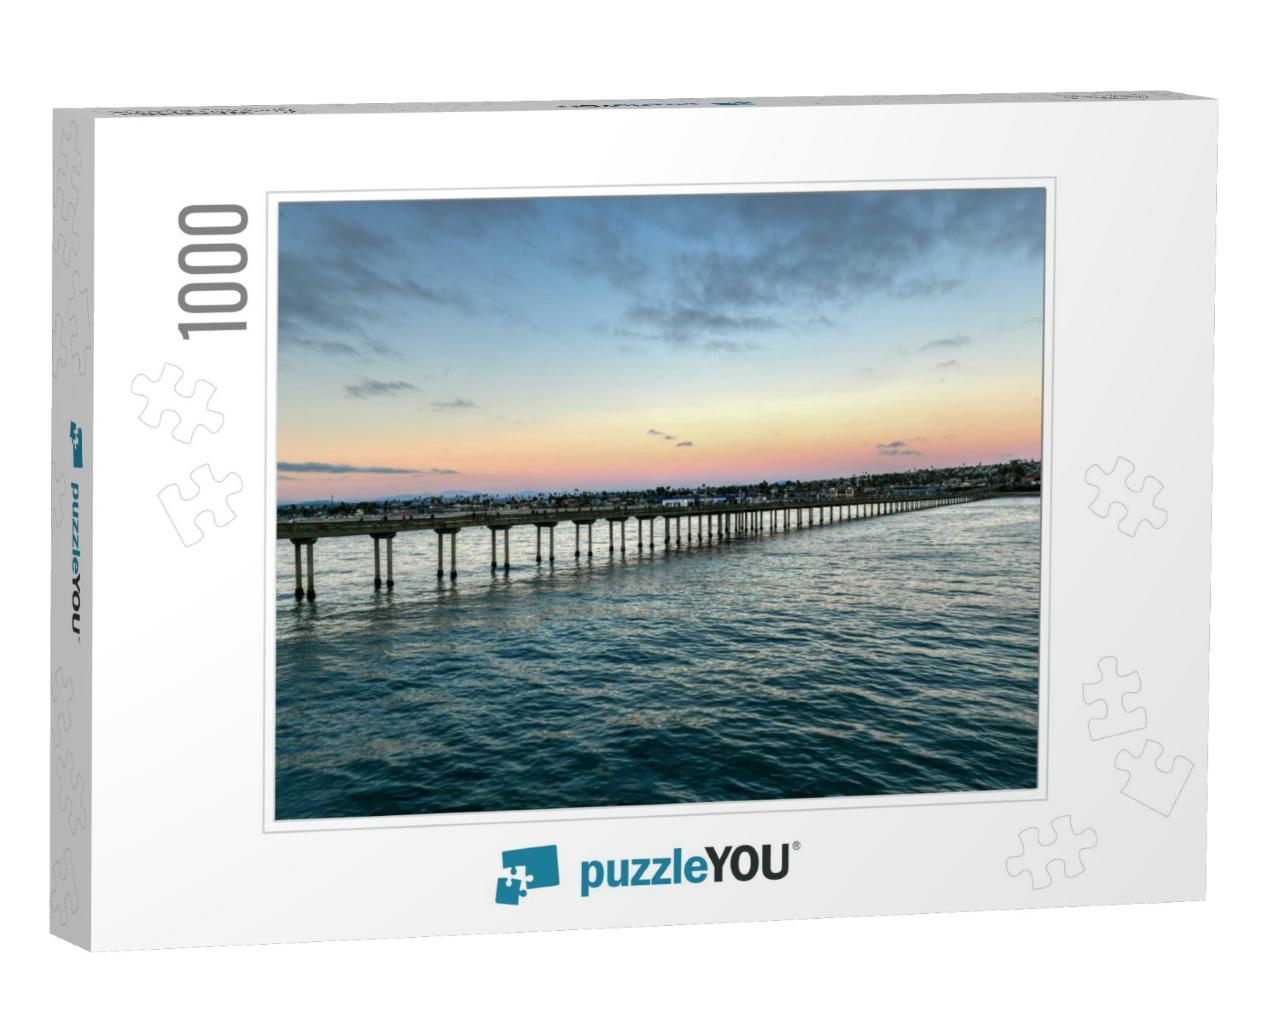 Sunset by the Ocean Beach Pier in San Diego, California... Jigsaw Puzzle with 1000 pieces